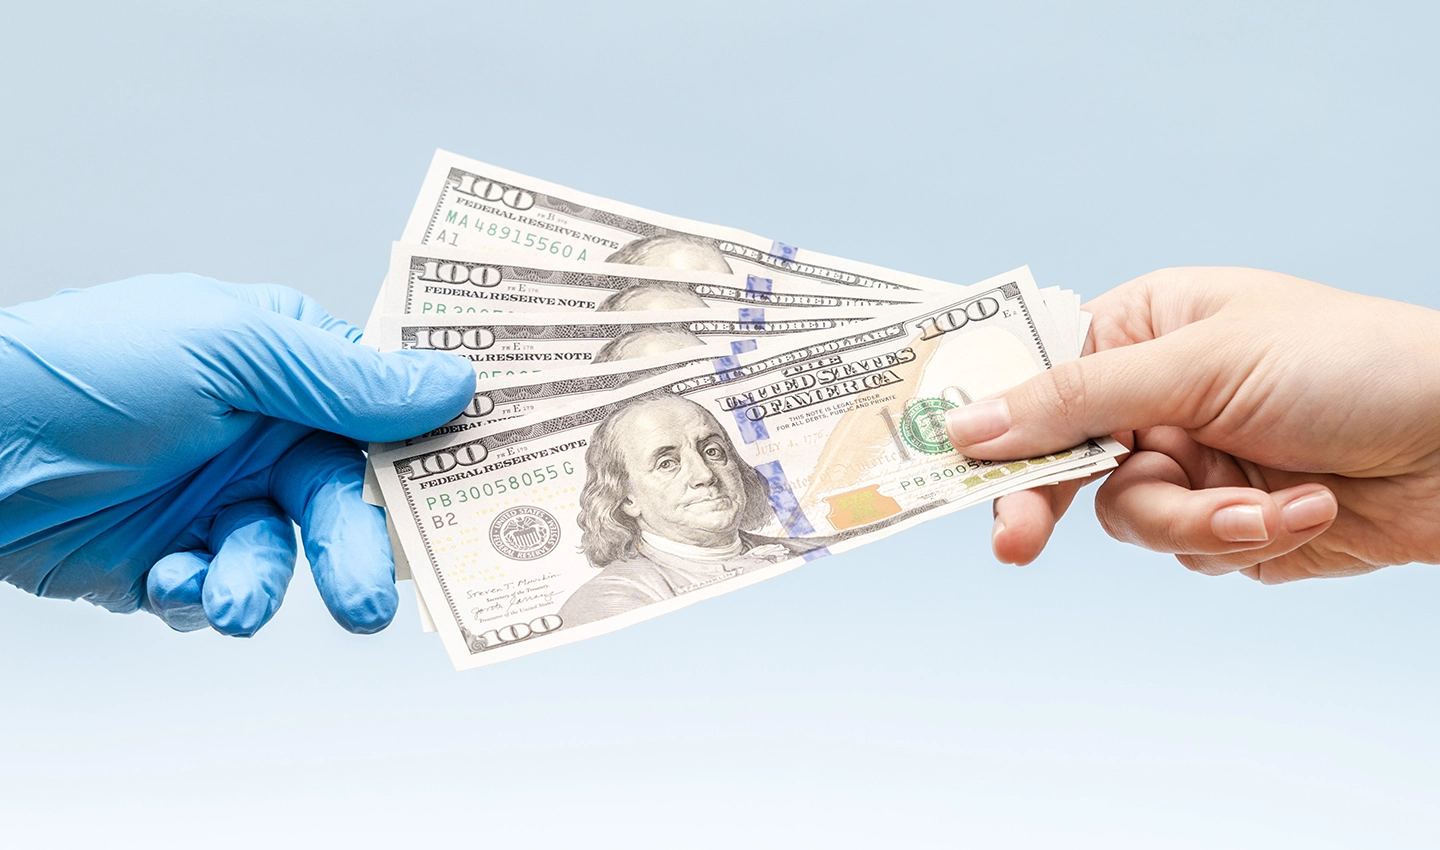 Hand of a person giving money to a surgeon with gloves, representing if the facelift surgery worth the cost.